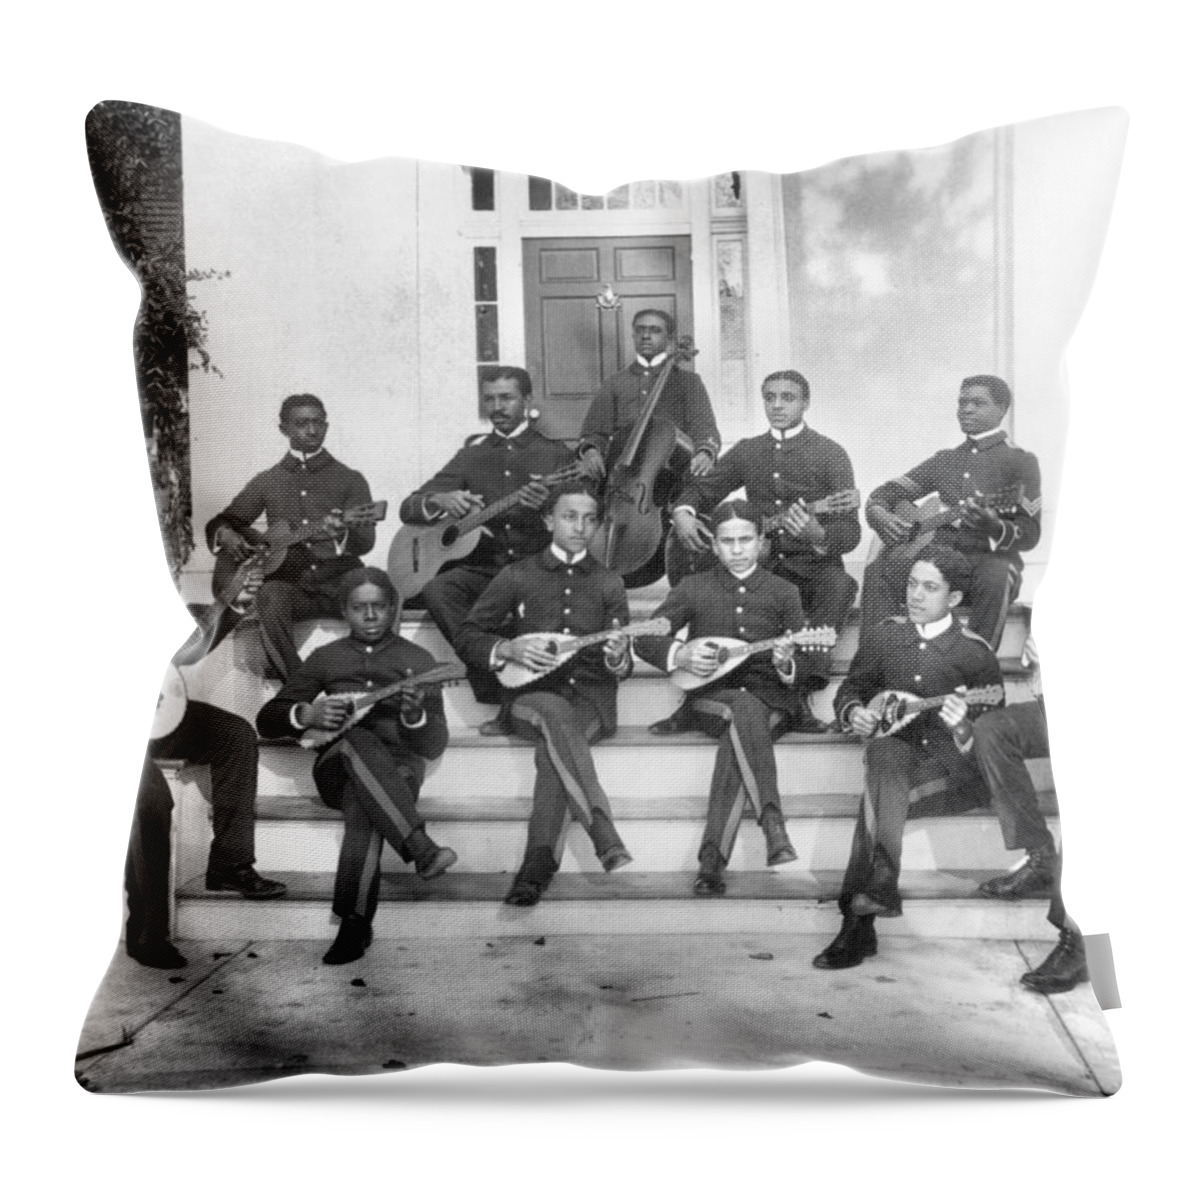 1898 Throw Pillow featuring the photograph Hampton Institute, C1898 by Granger